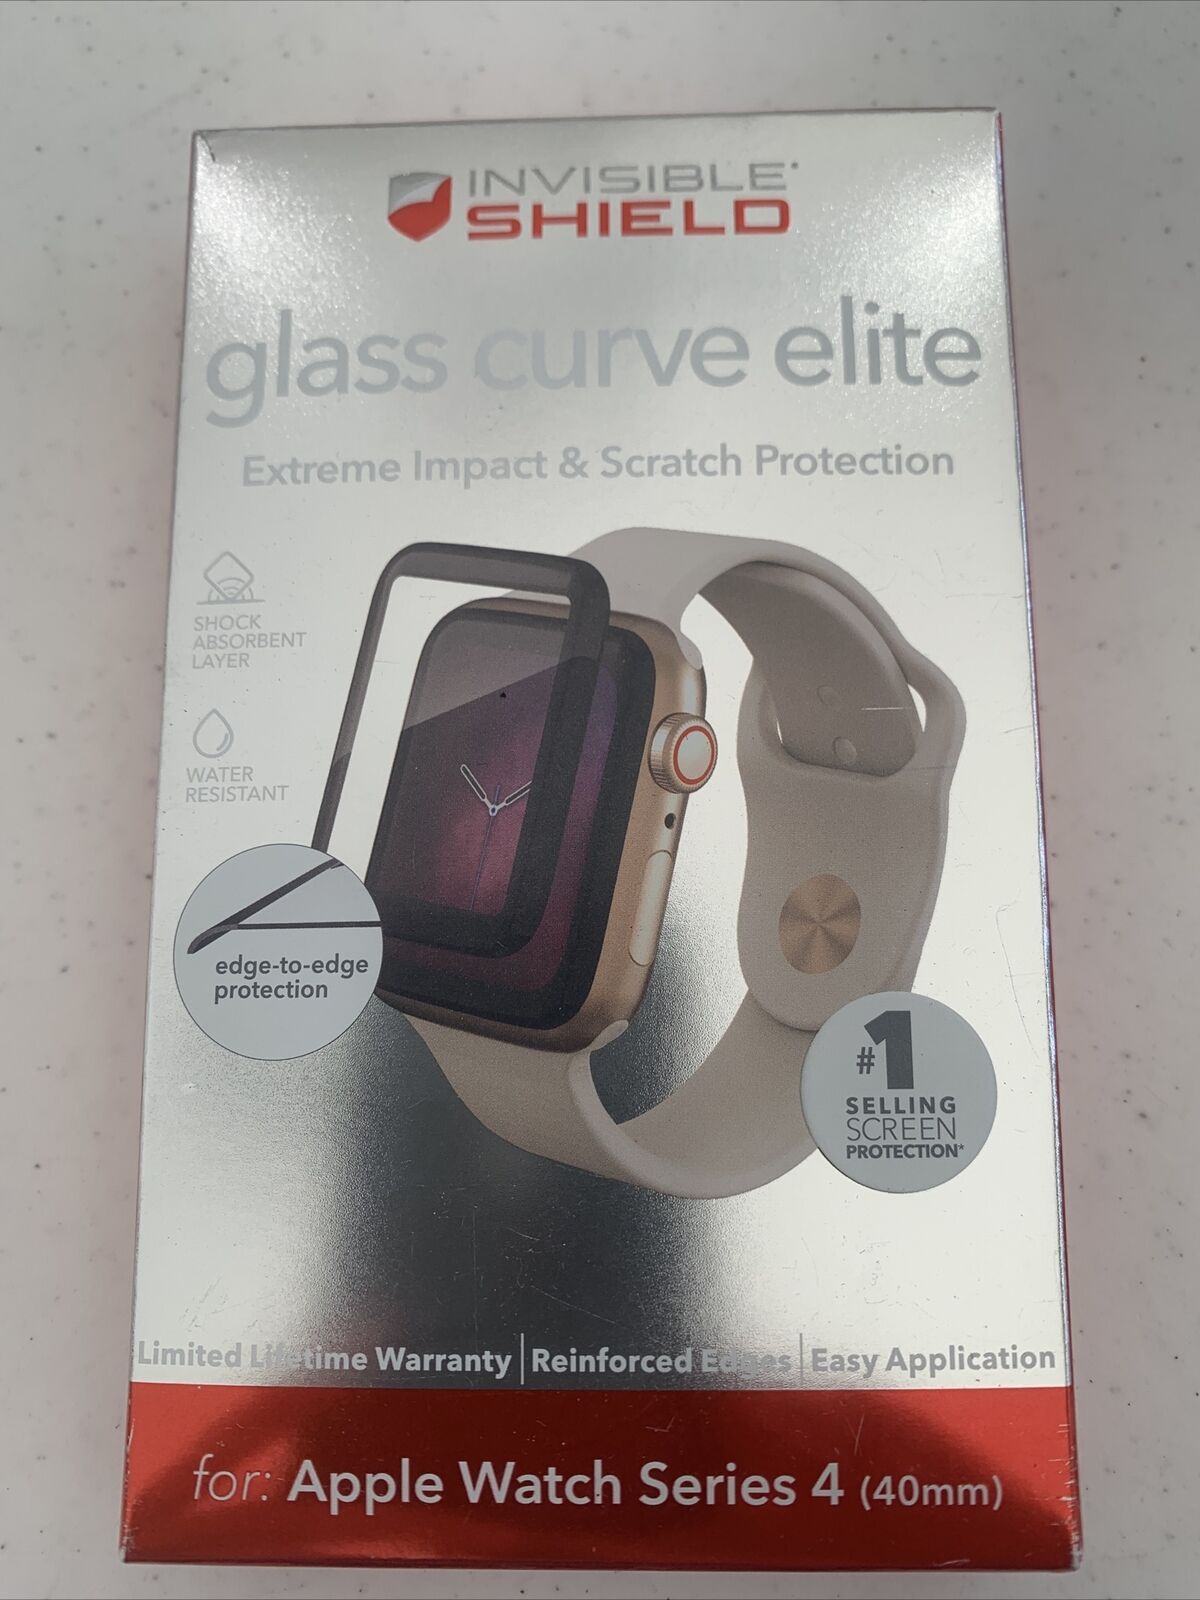 Invisible Shield Glass Curve Elite Screen Protector Apple Watch Series 4- 40mm